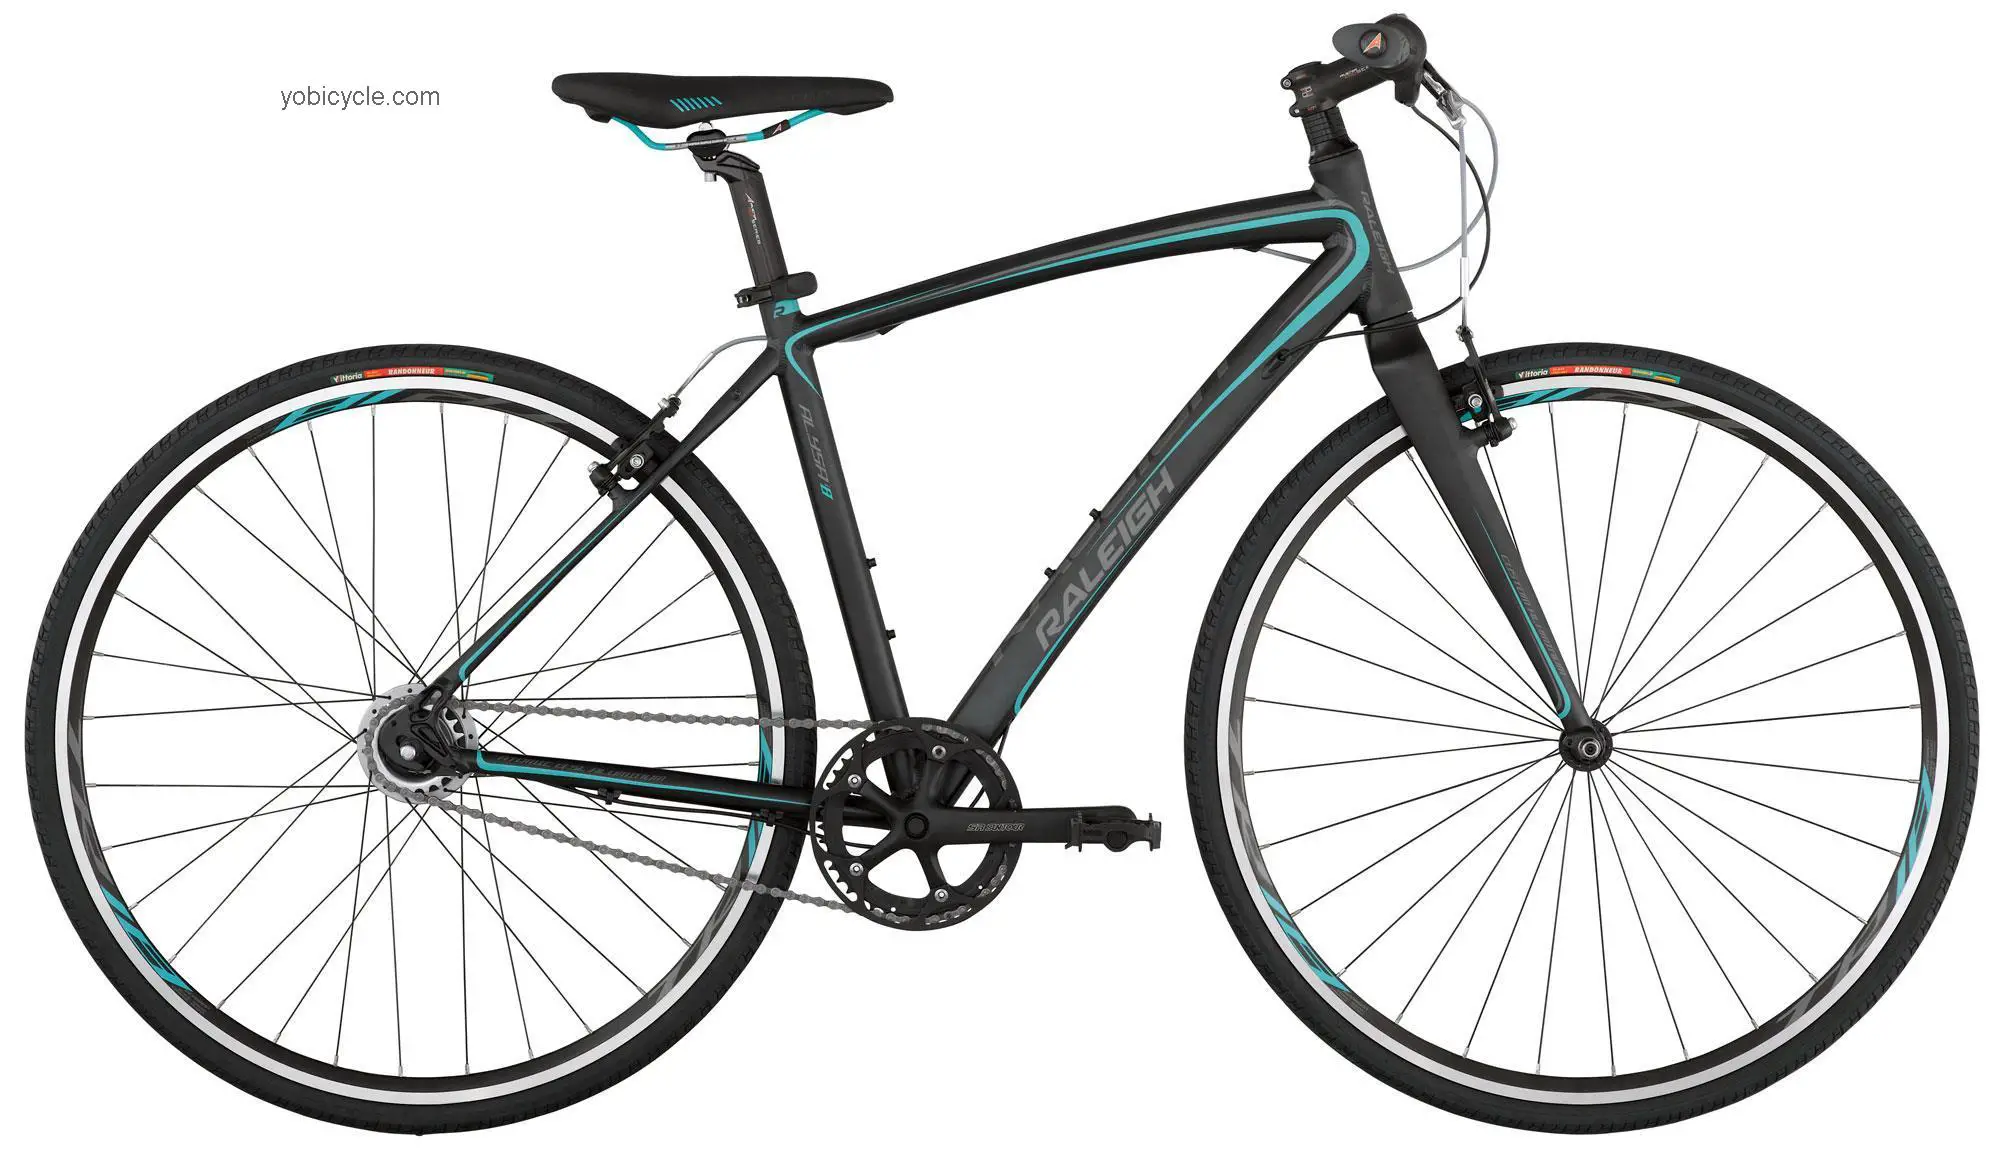 Raleigh Alysa i8 2012 comparison online with competitors